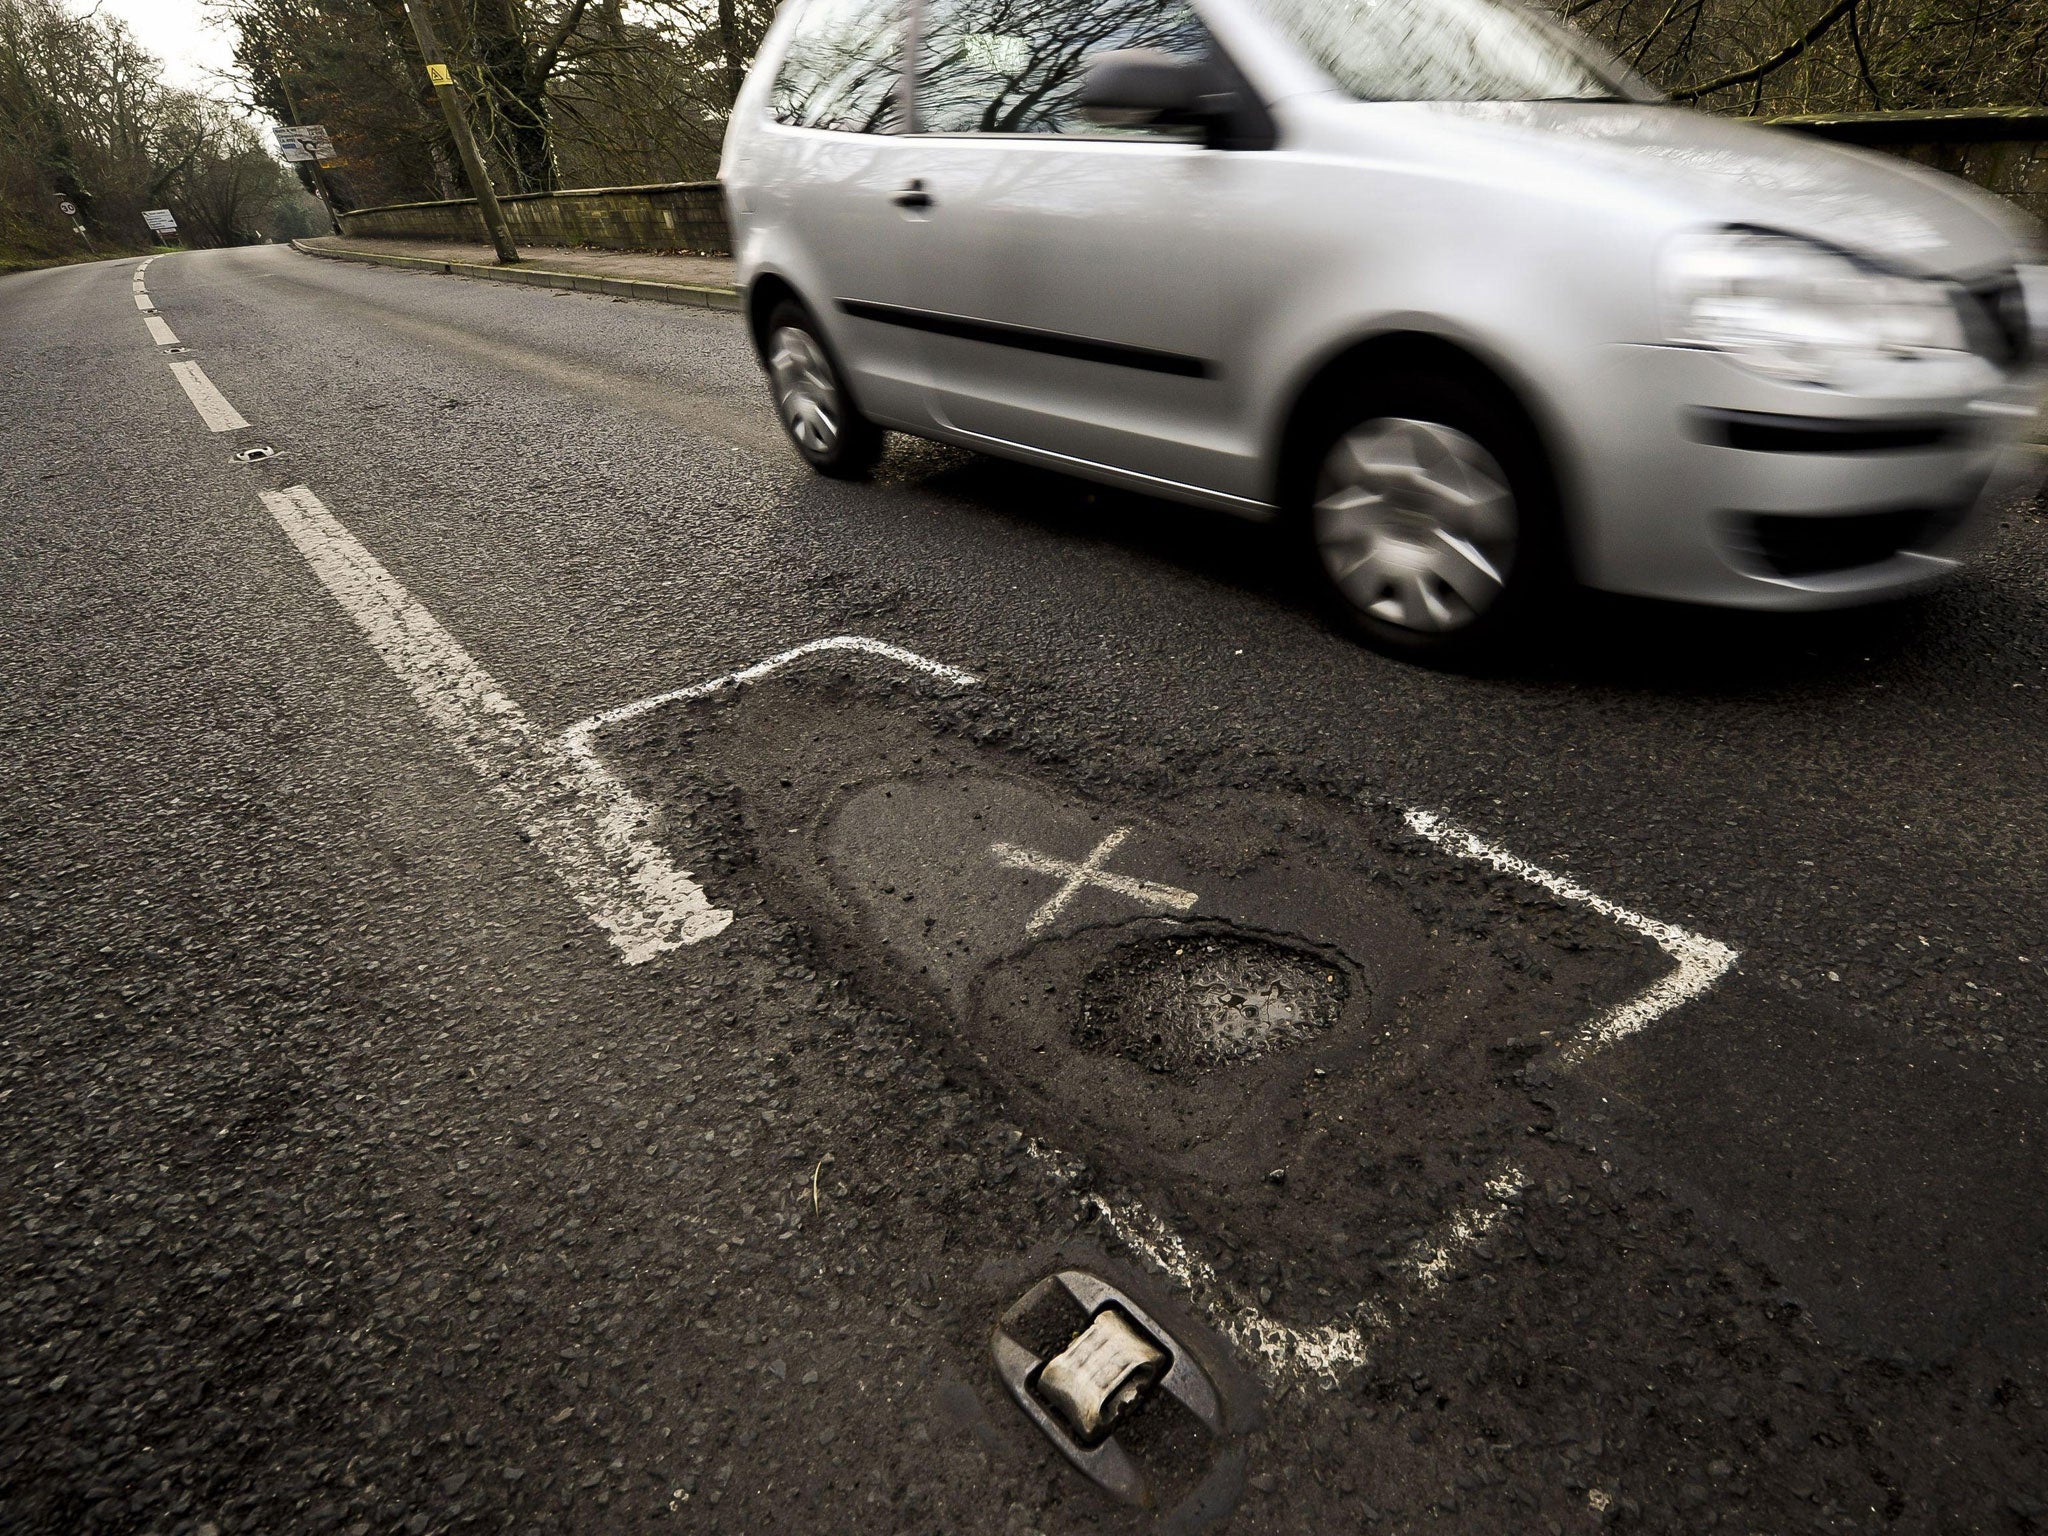 Road maintenance could be affected by the cuts